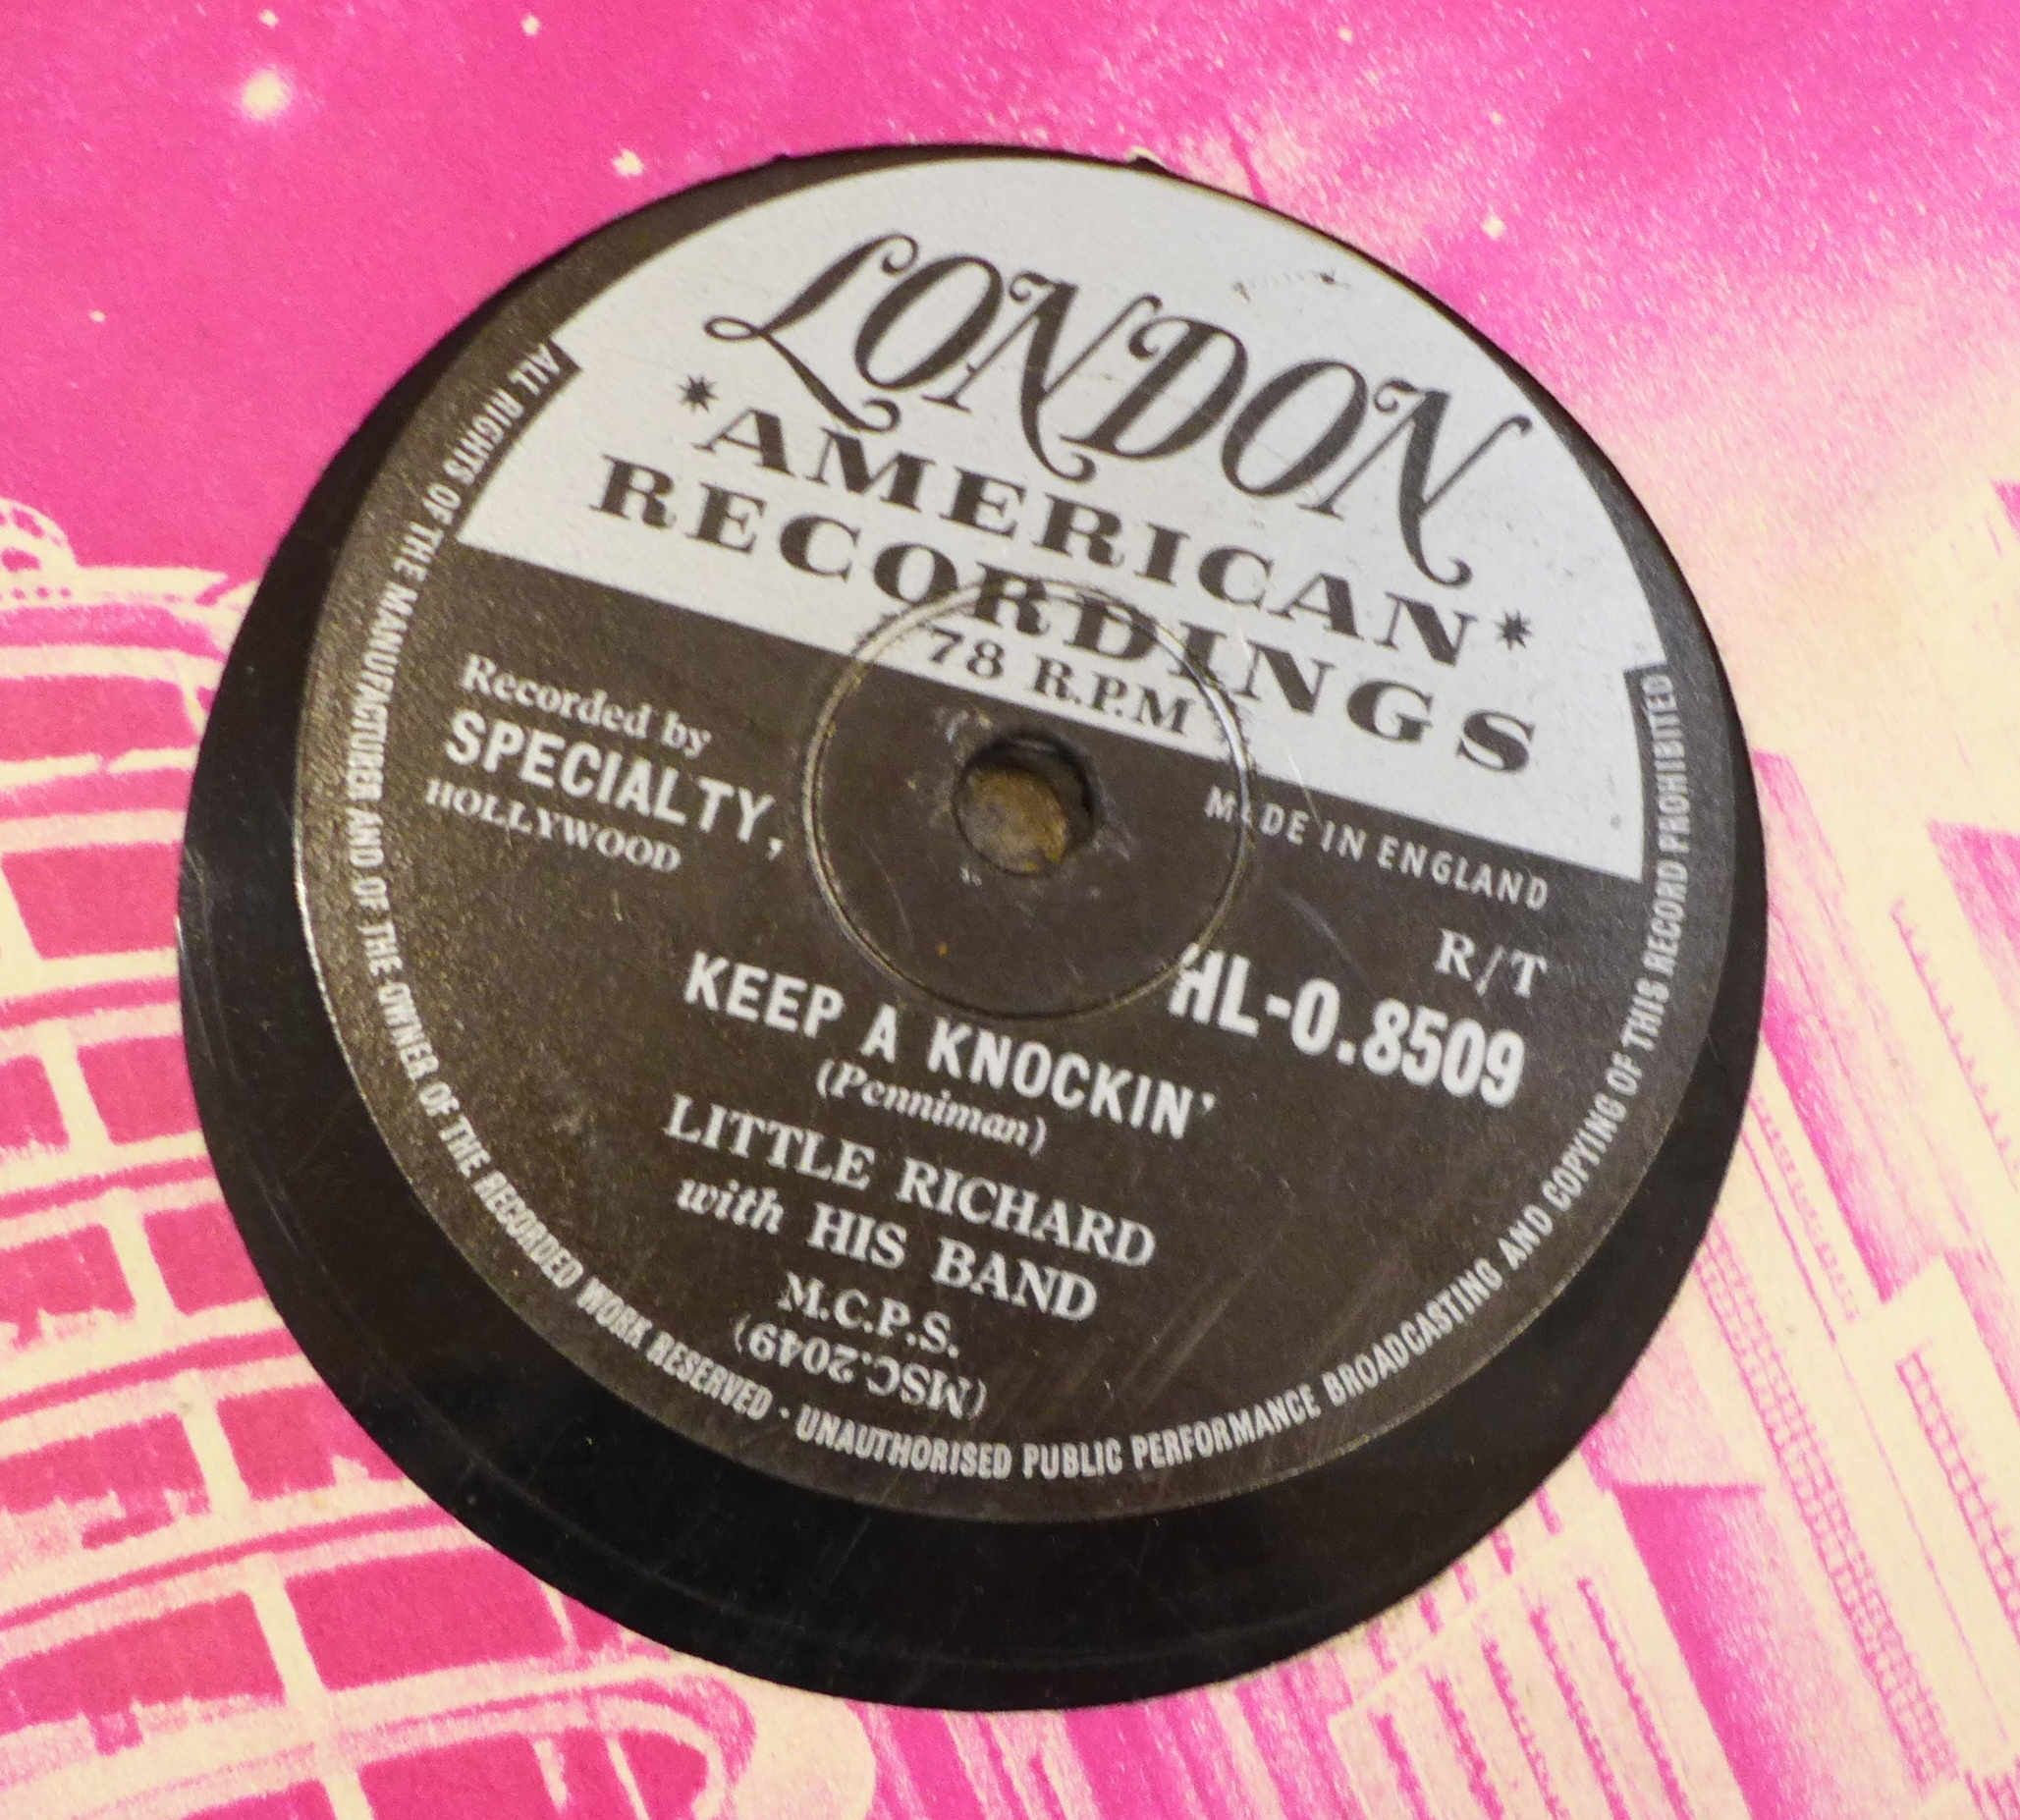 A collection of 78rpm records, rock 'n' roll, including Elvis Presley, Jerry Lee Lewis, - Image 2 of 2